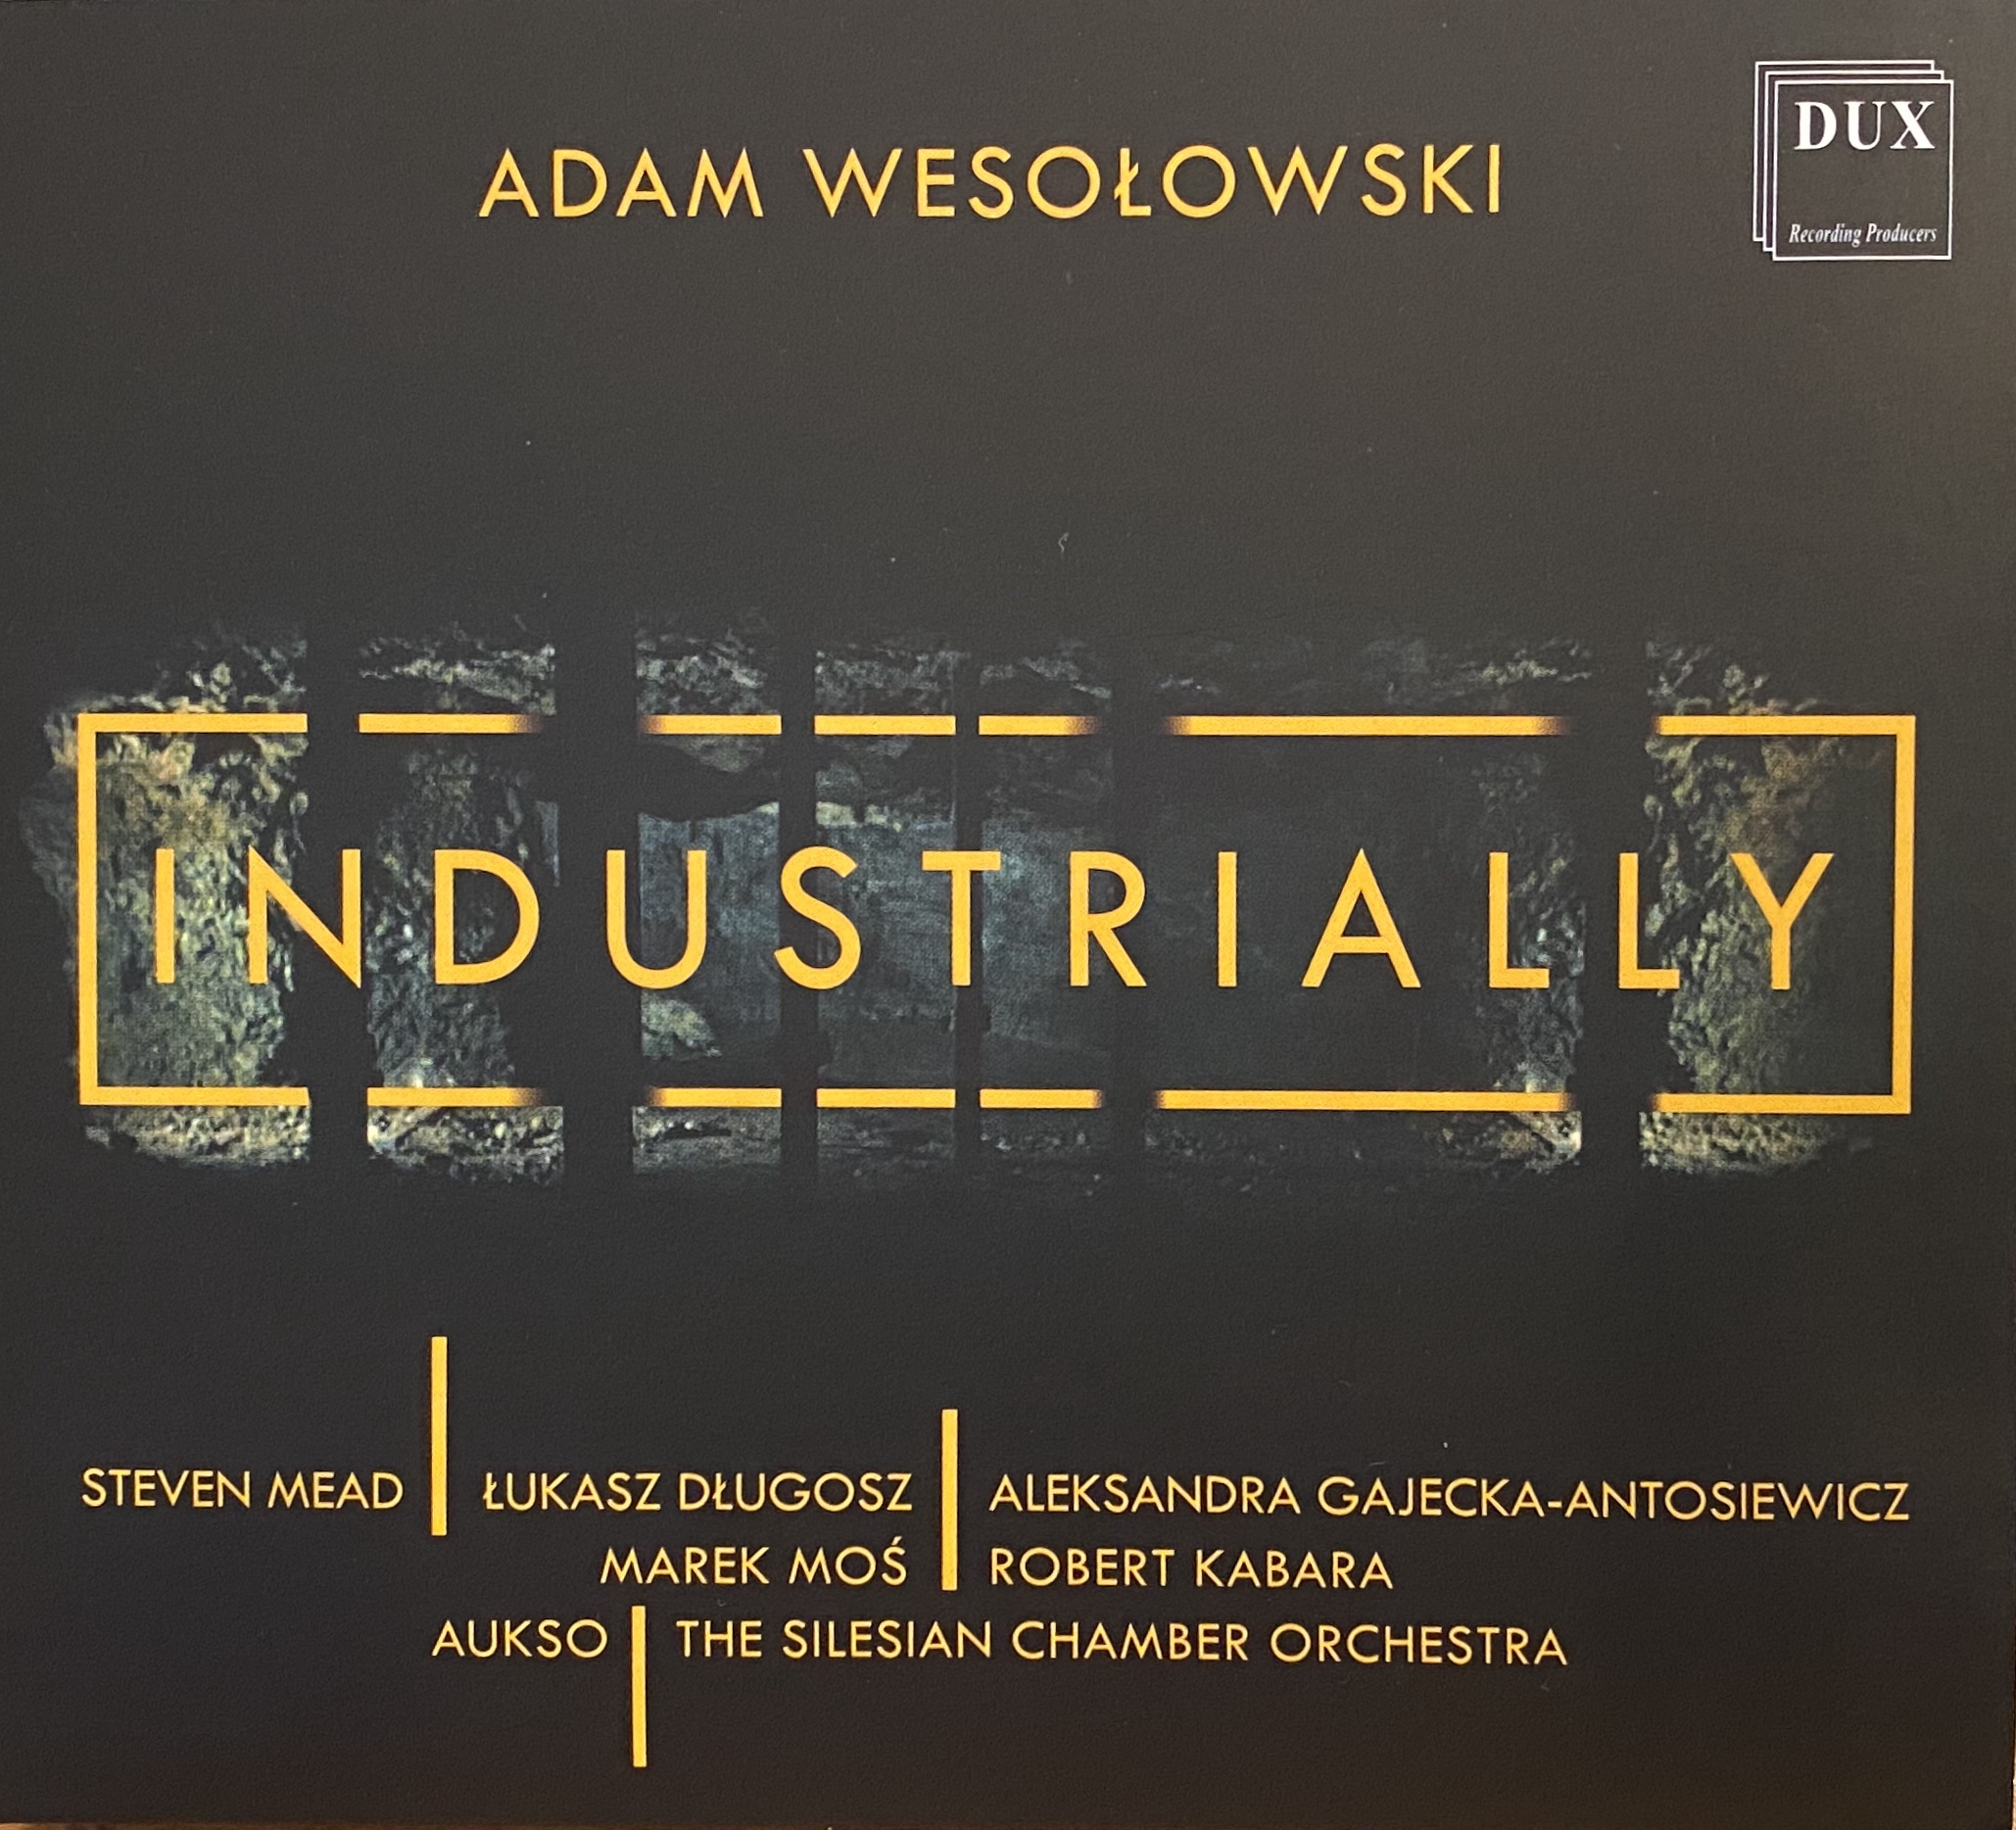 CD - Industrially - 4 major works by Adam Wesolowski and String Orchestra, incl. Euphory Concerto with Steven Mead